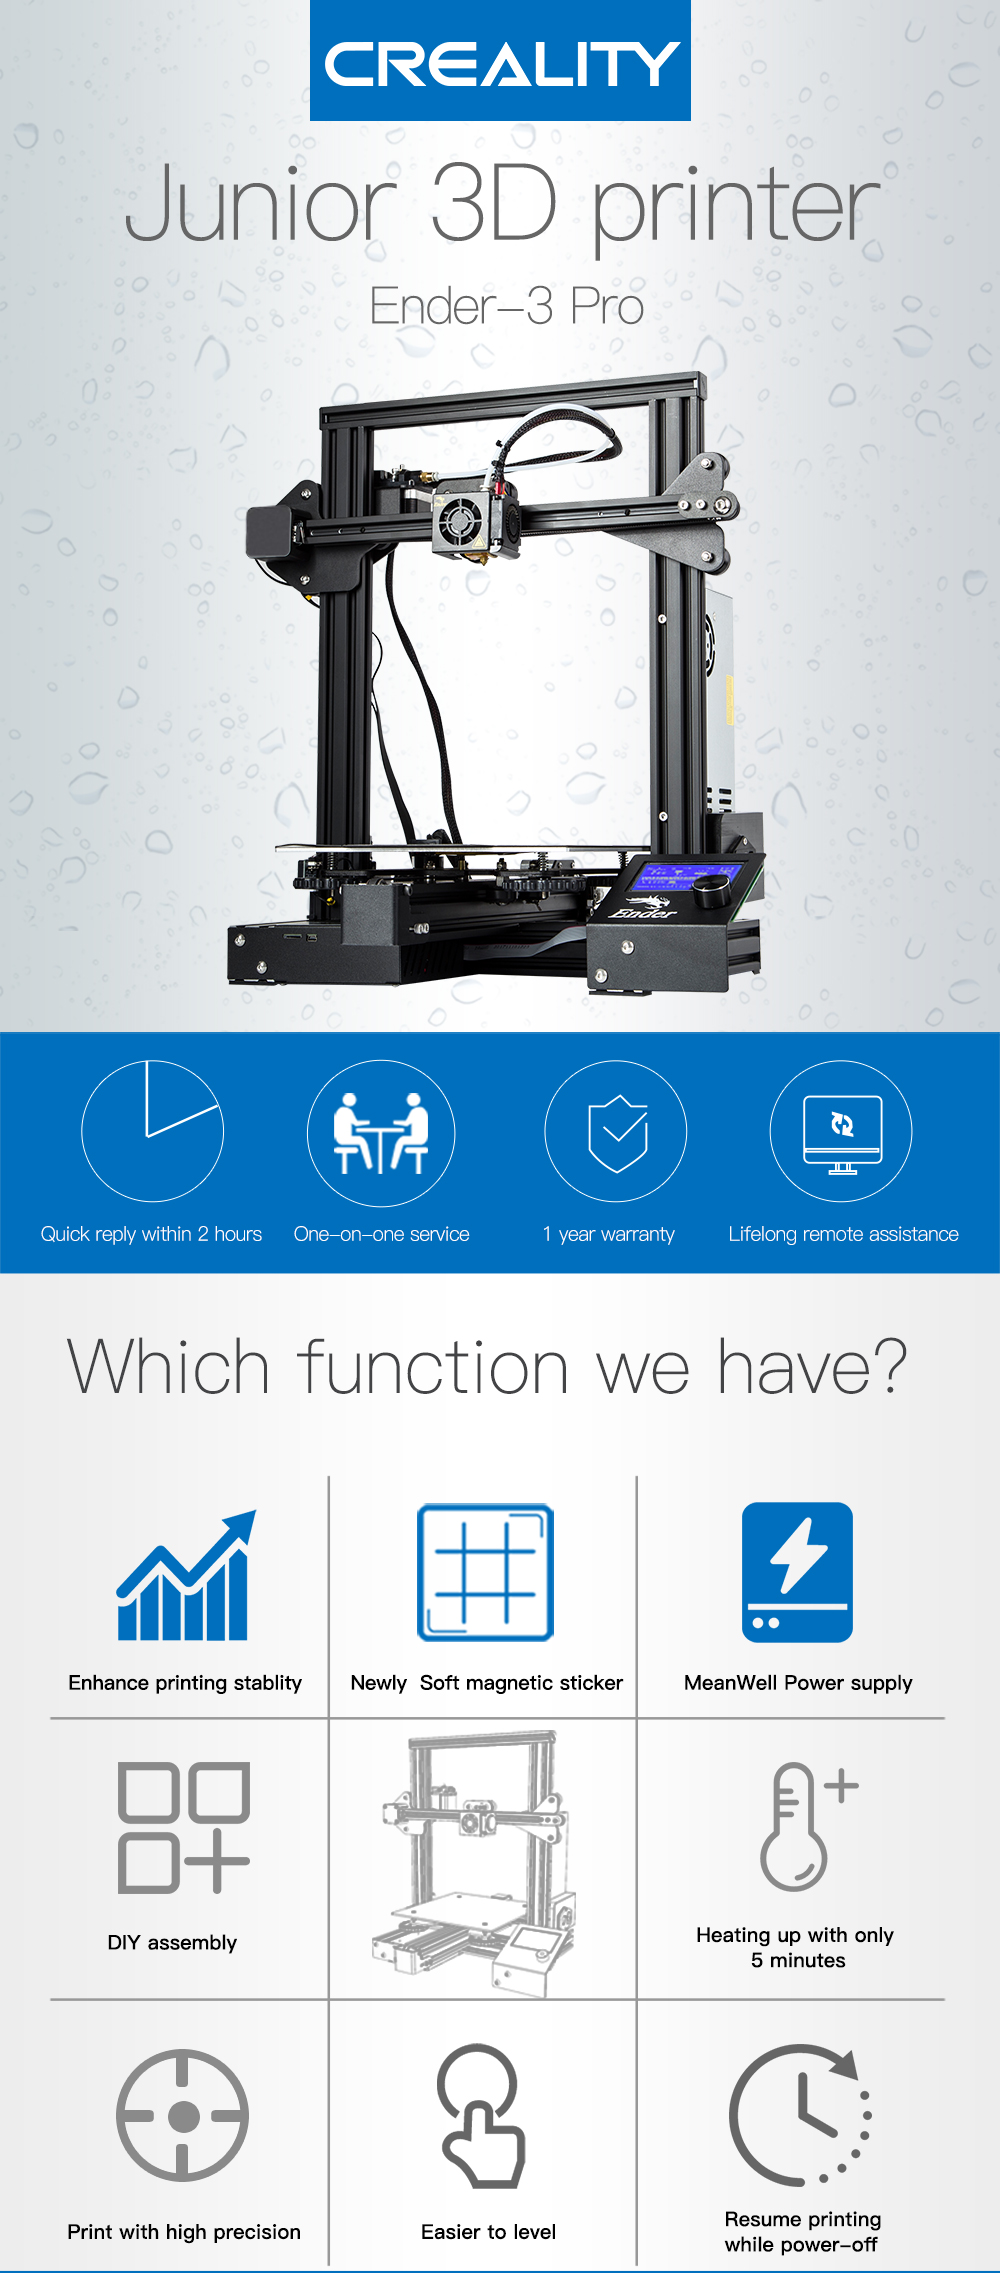 Creality 3D® Ender-3 Pro DIY 3D Printer Kit 220x220x250mm Printing Size With Magnetic Removable Platform Sticker/Power Resume Function/Off-line Print/Patent MK10 Extruder/Simple Leveling